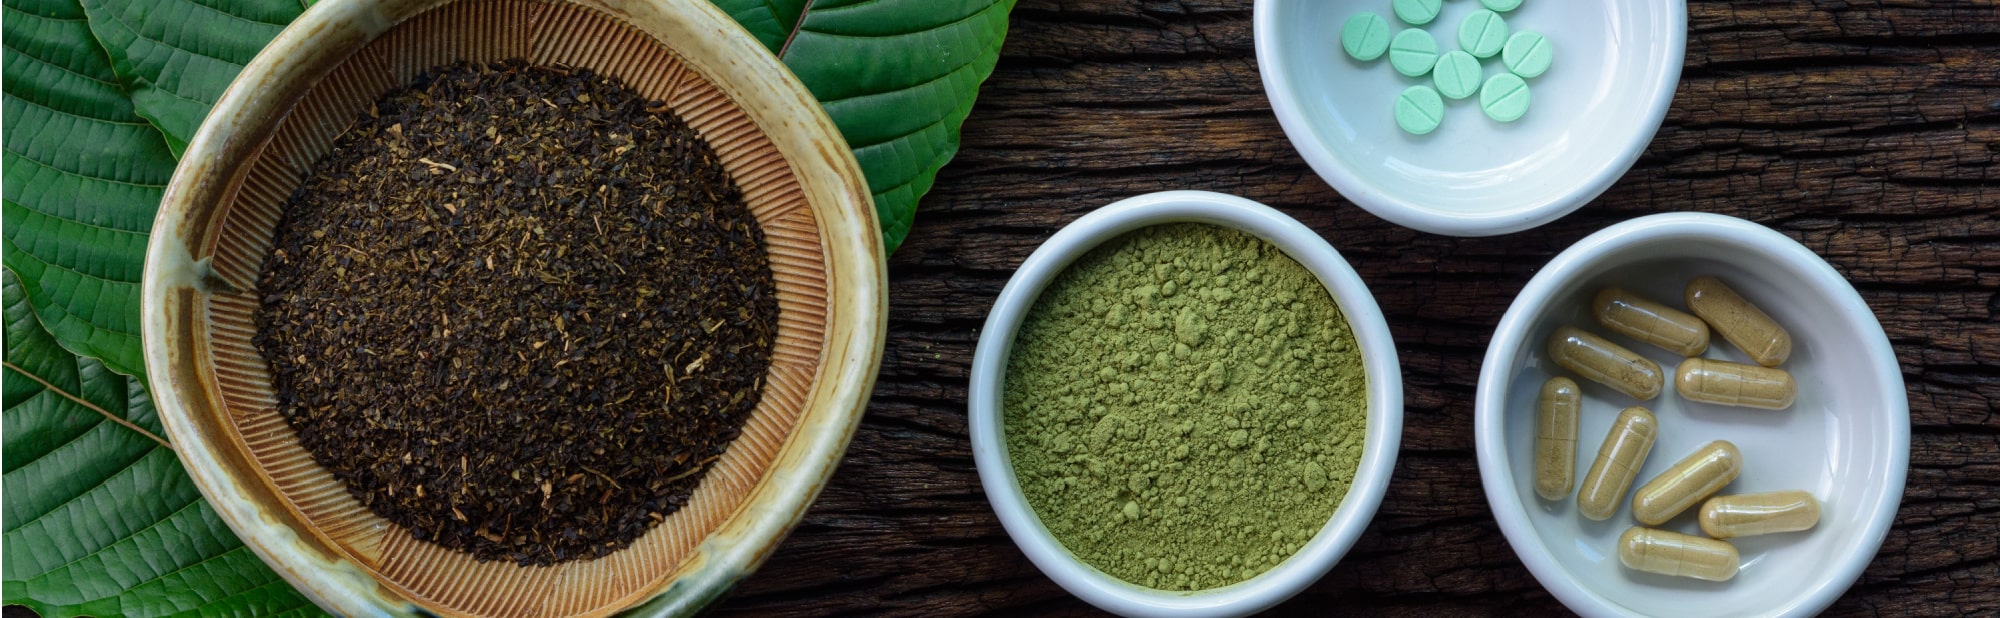 image of types of kratom products available